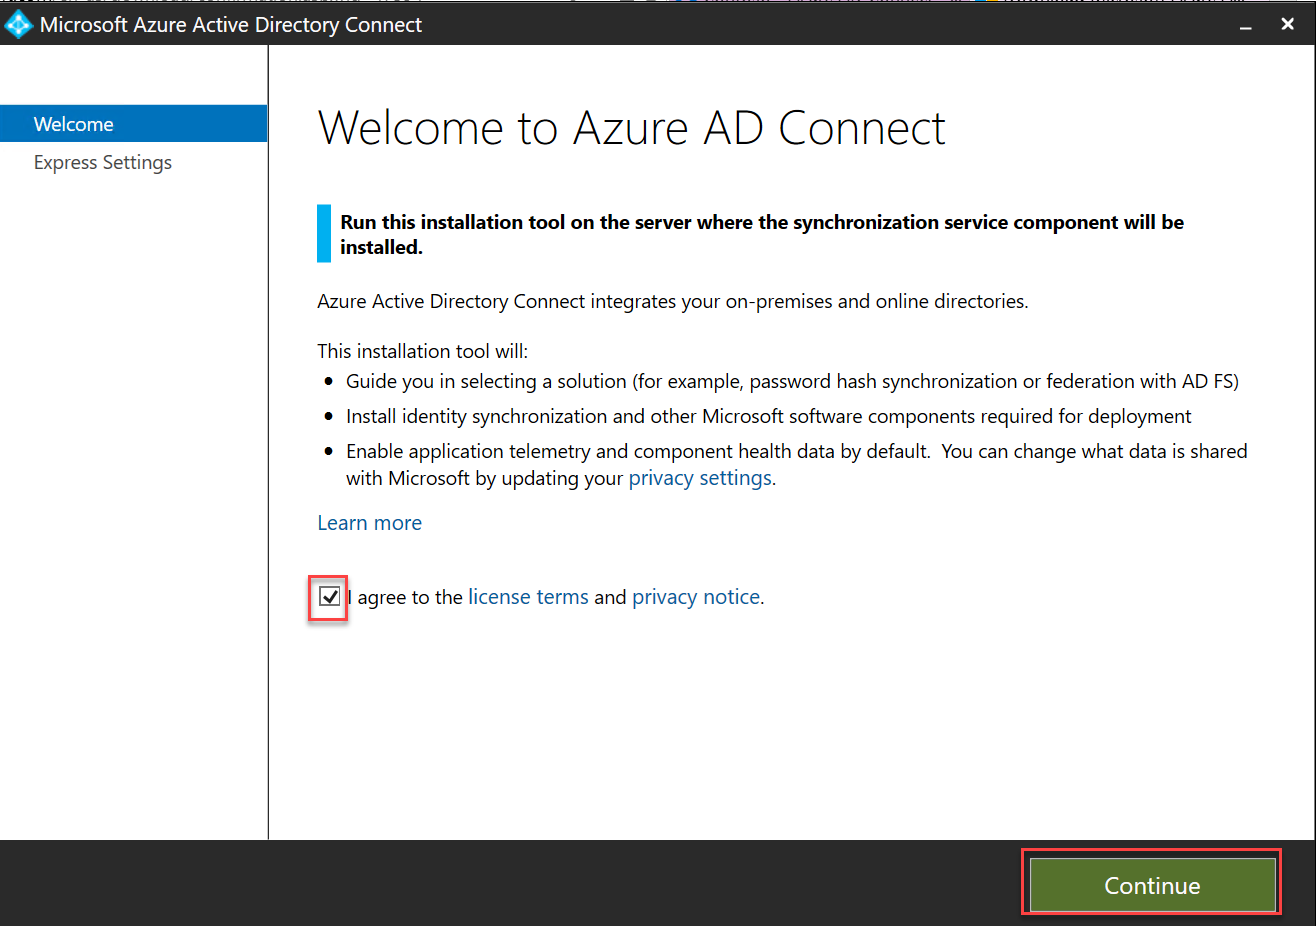 In this screenshot, the Welcome to Azure AD Connect page is depicted with the ‘I agree to the license terms and privacy notice’ box checked and the Continue button selected.